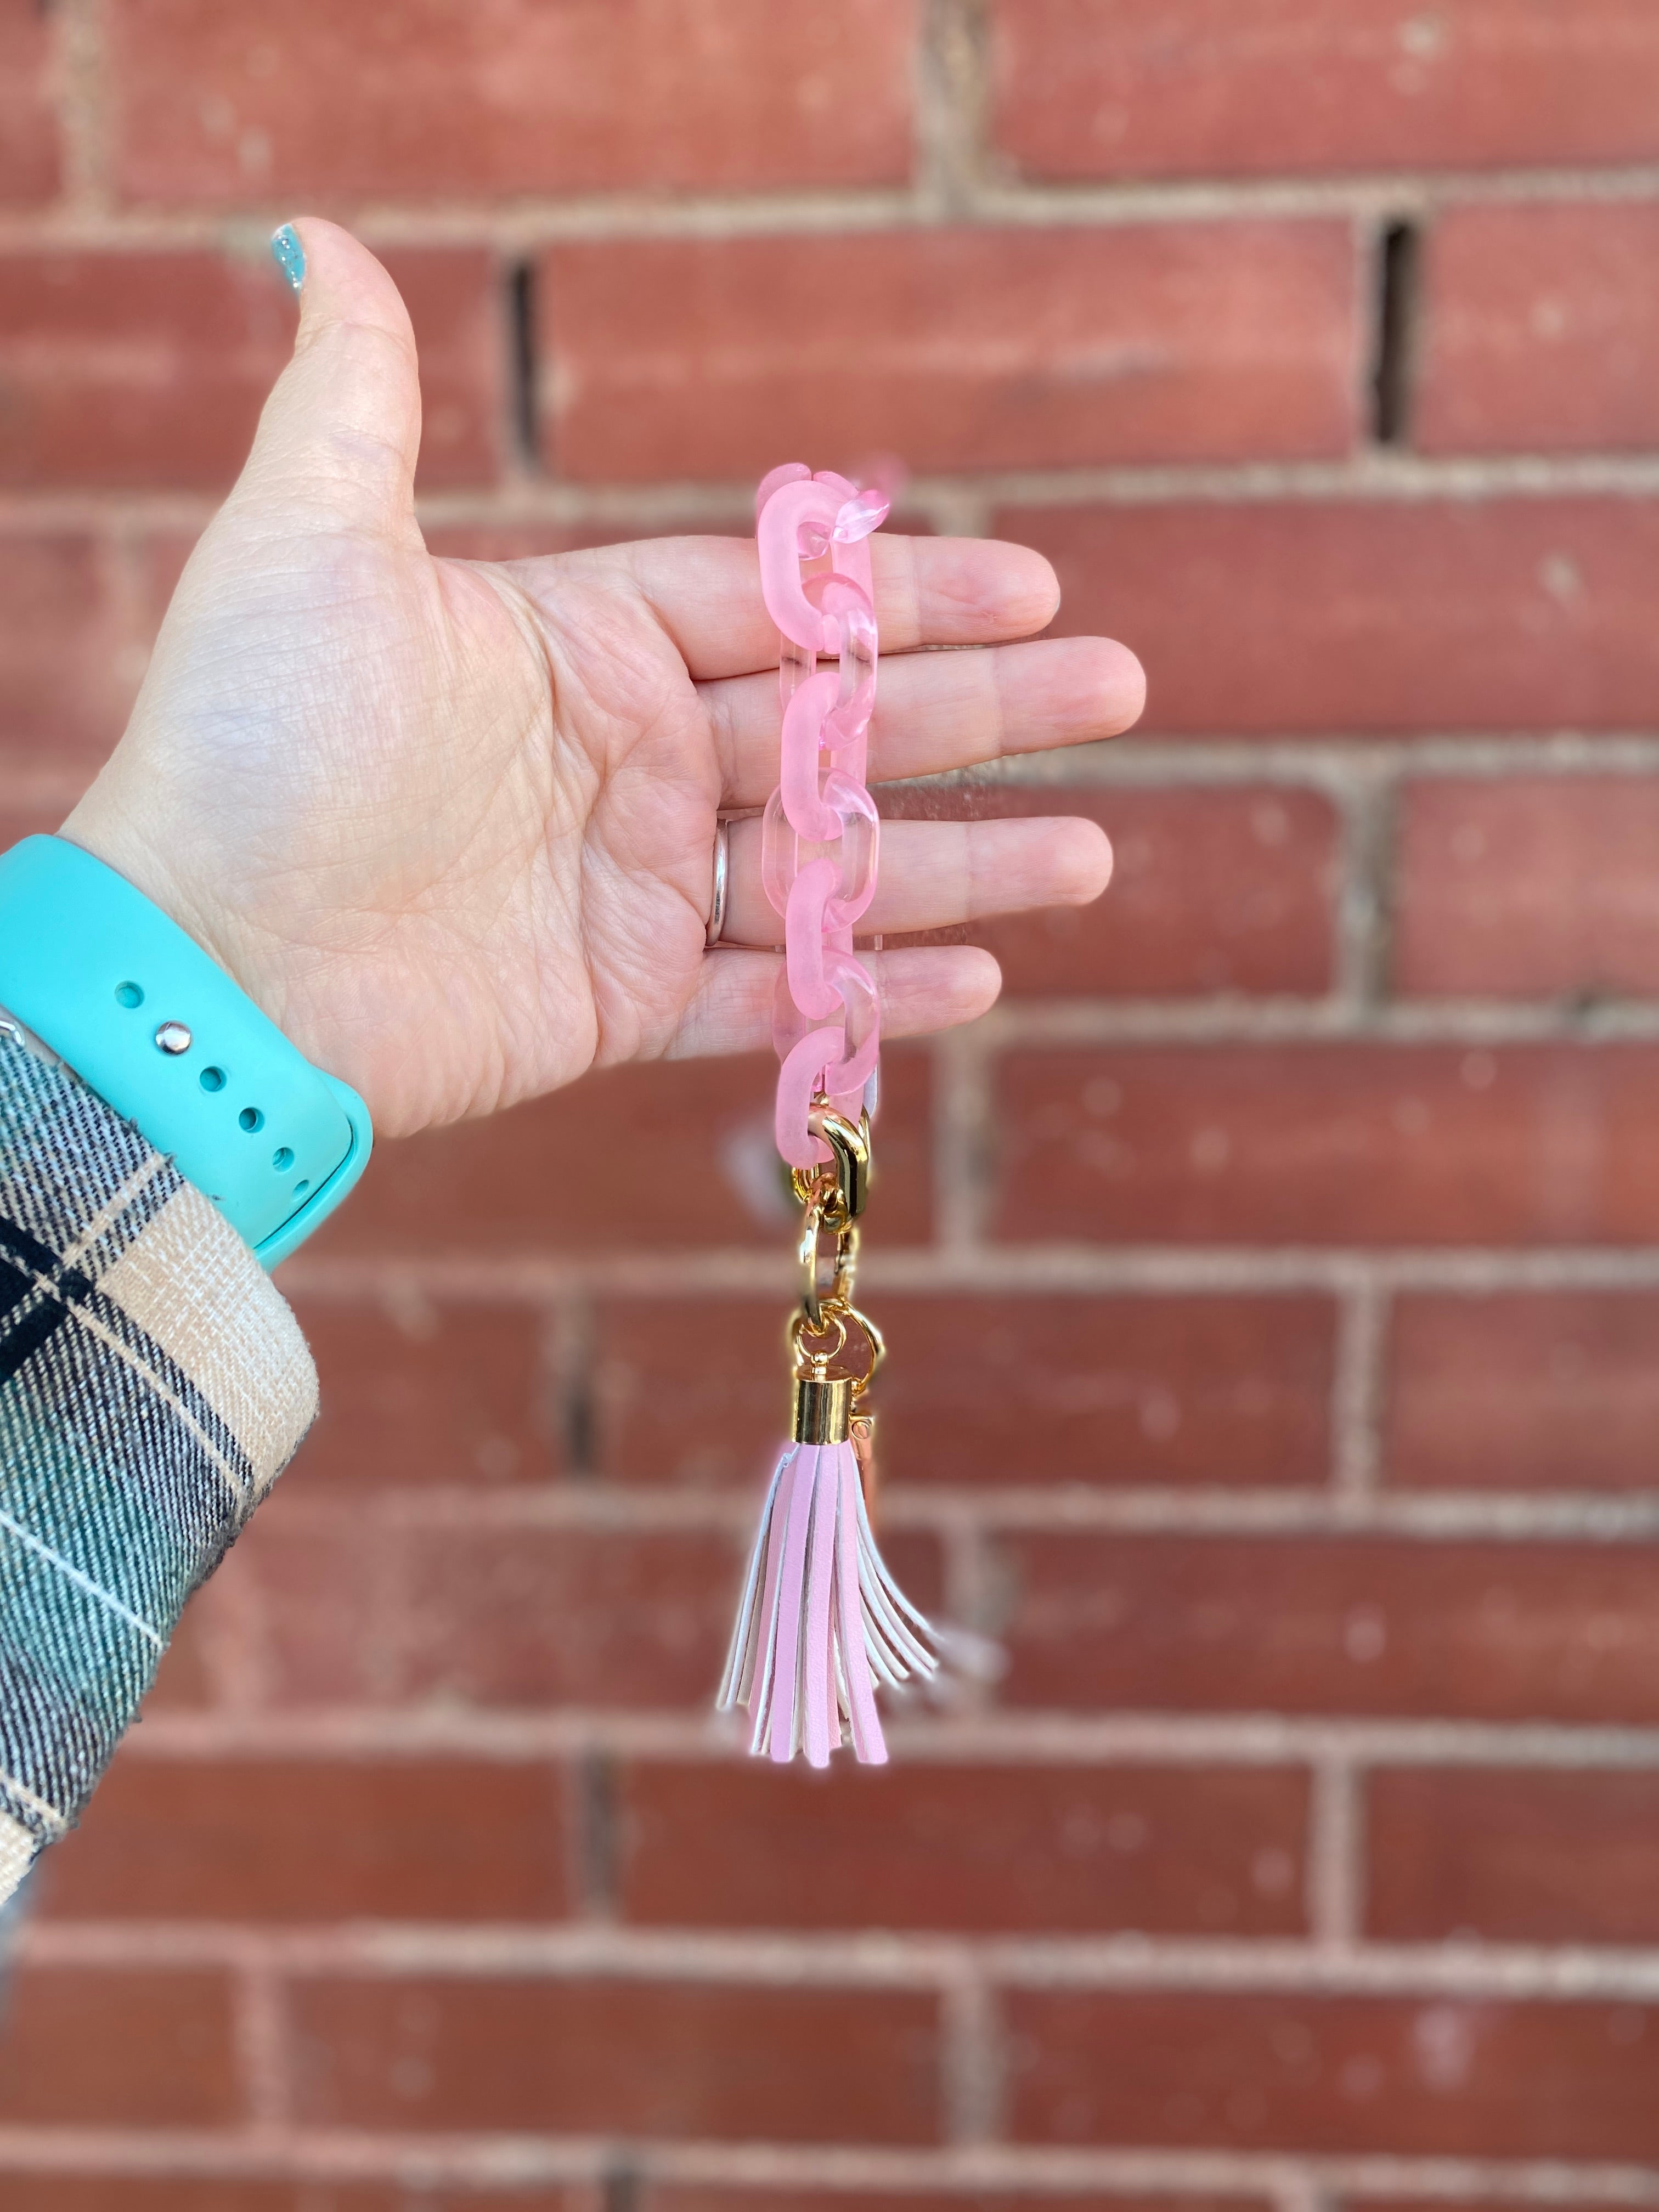 The Link Between You And Me Linked Key Chain Wristlet